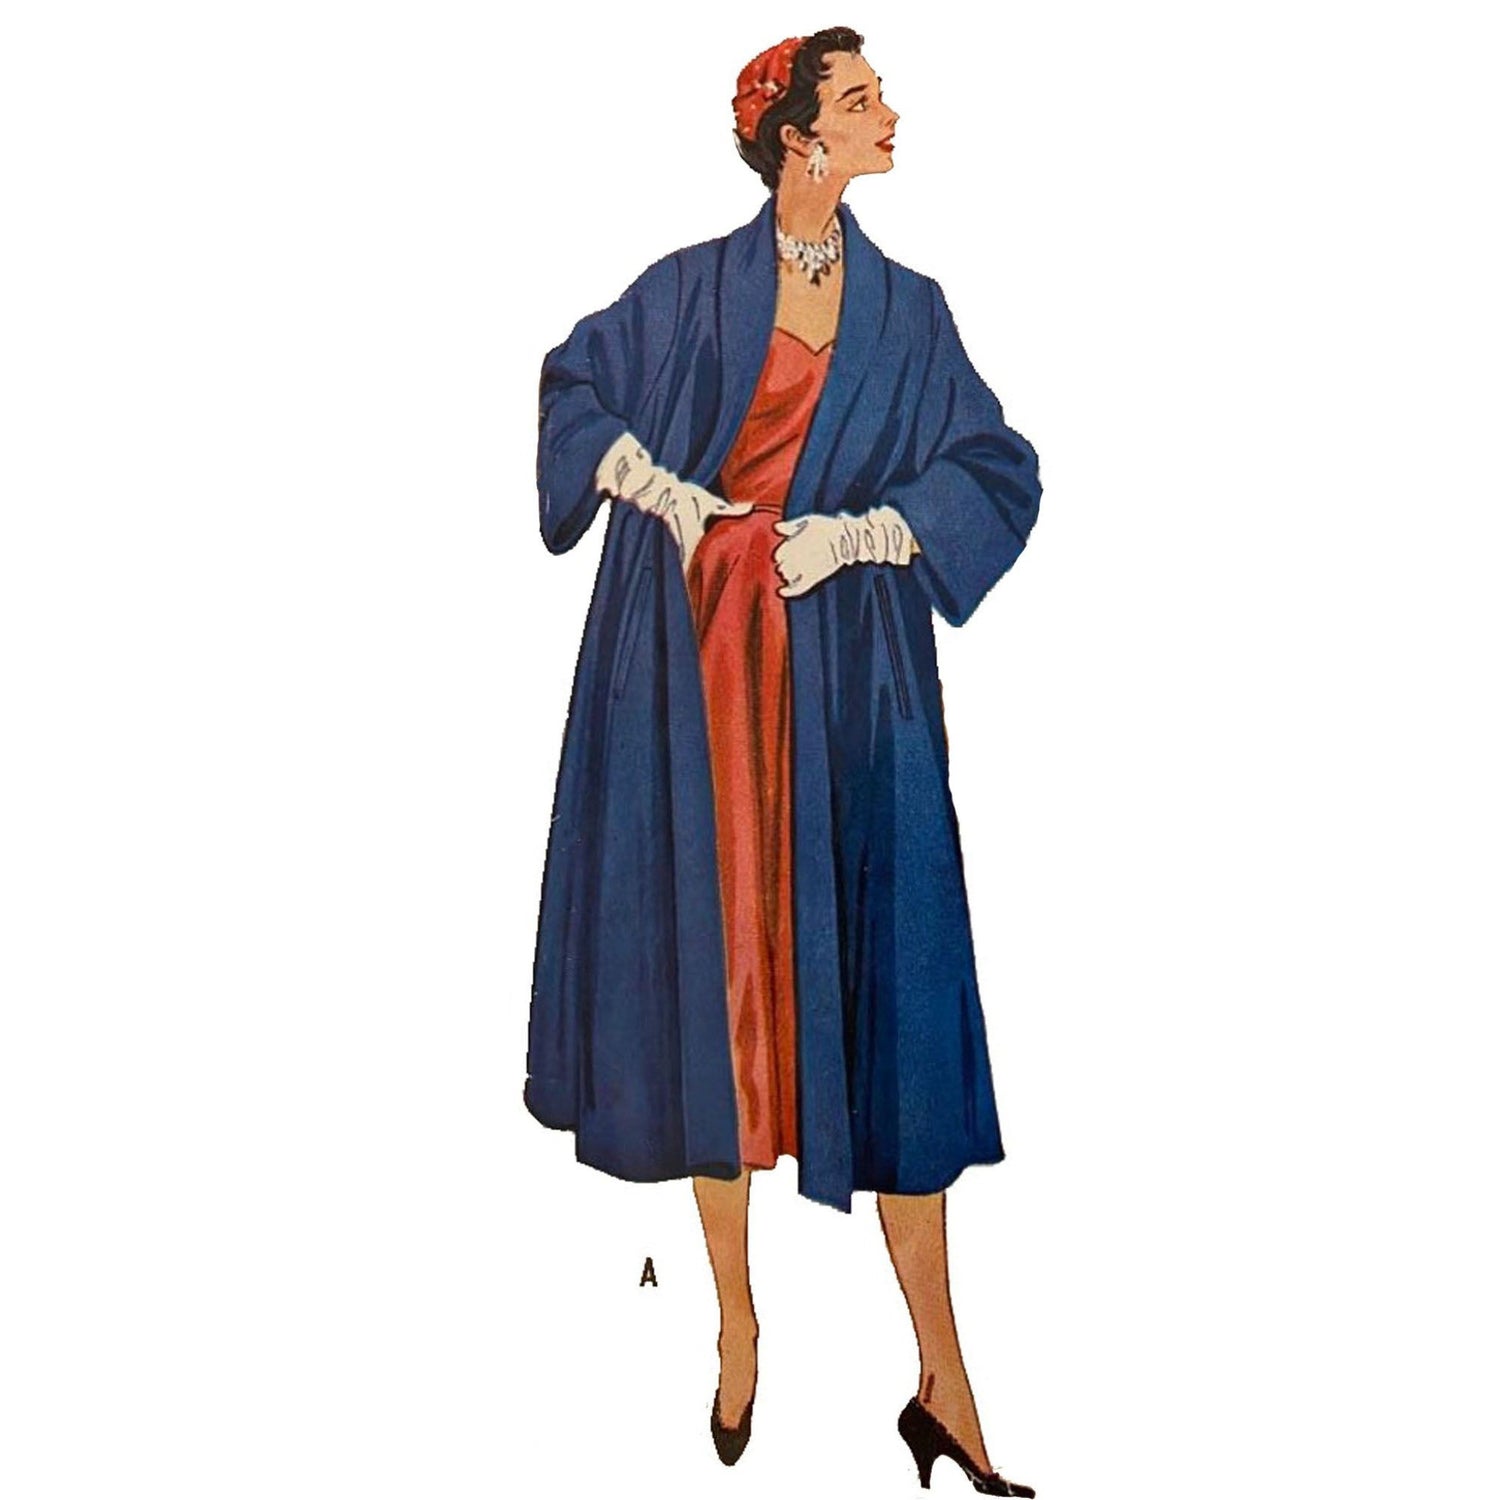 Model wearing 1950s outer made from McCall’s 9668 pattern